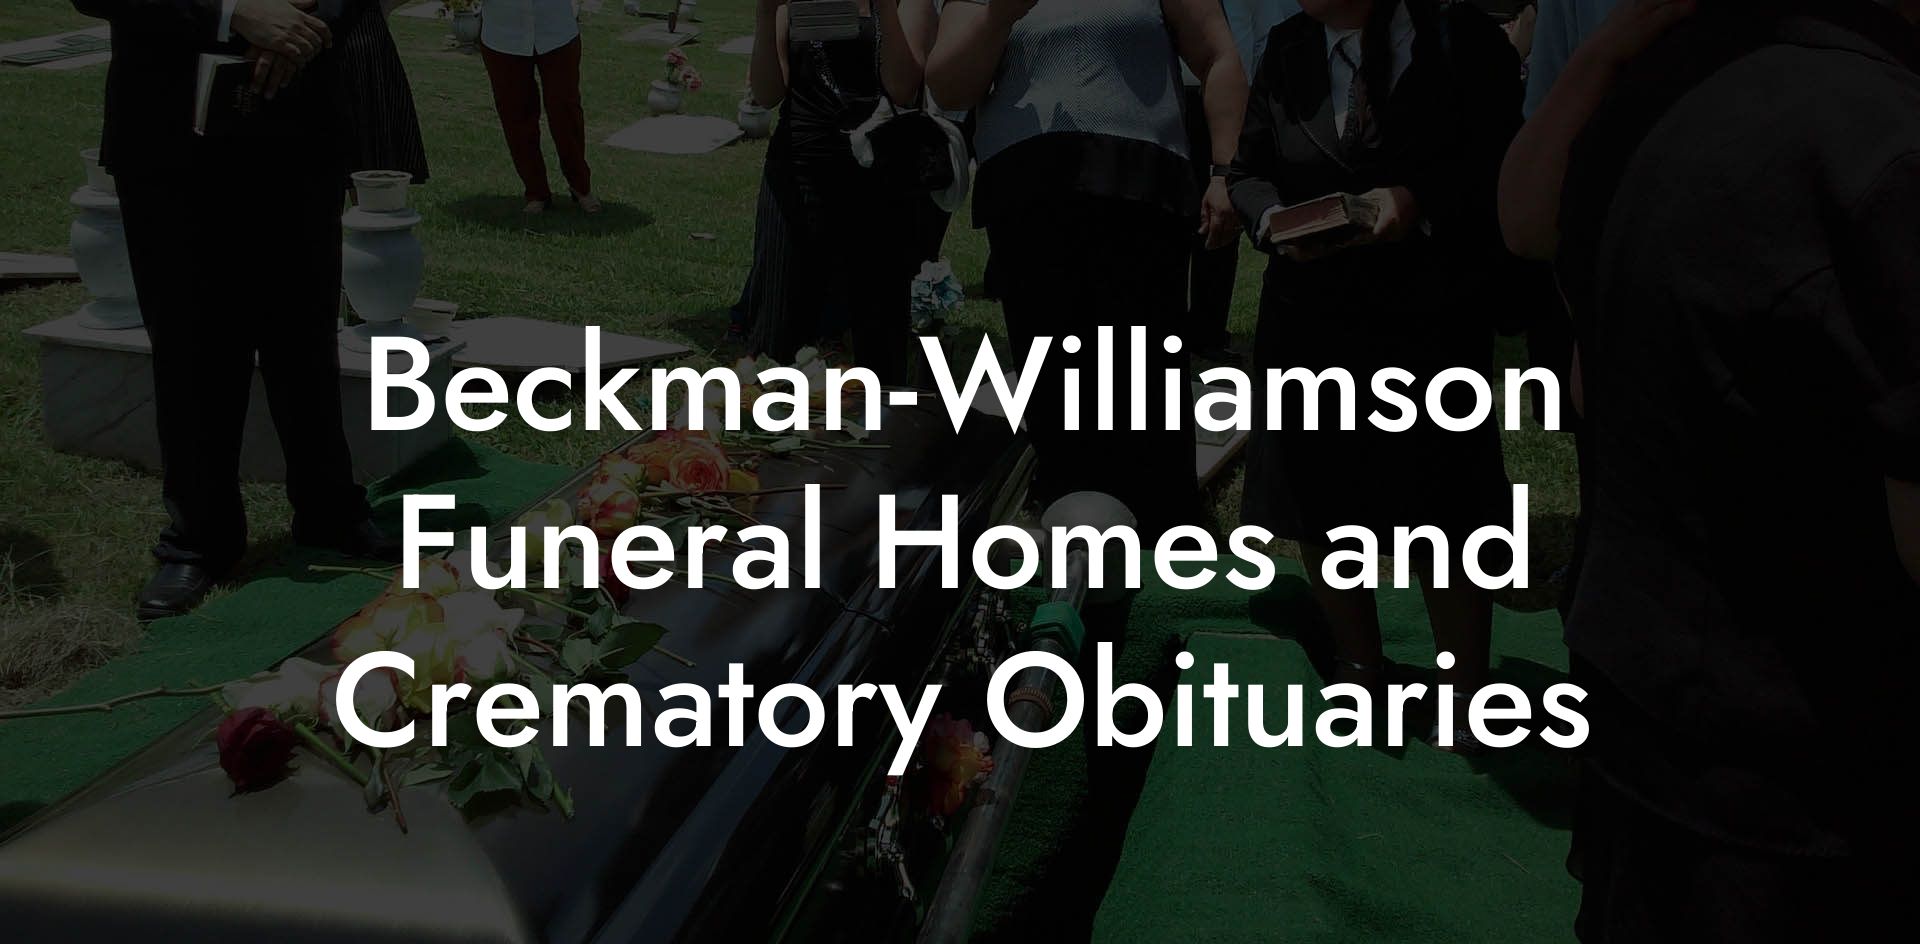 Beckman-Williamson Funeral Homes and Crematory Obituaries